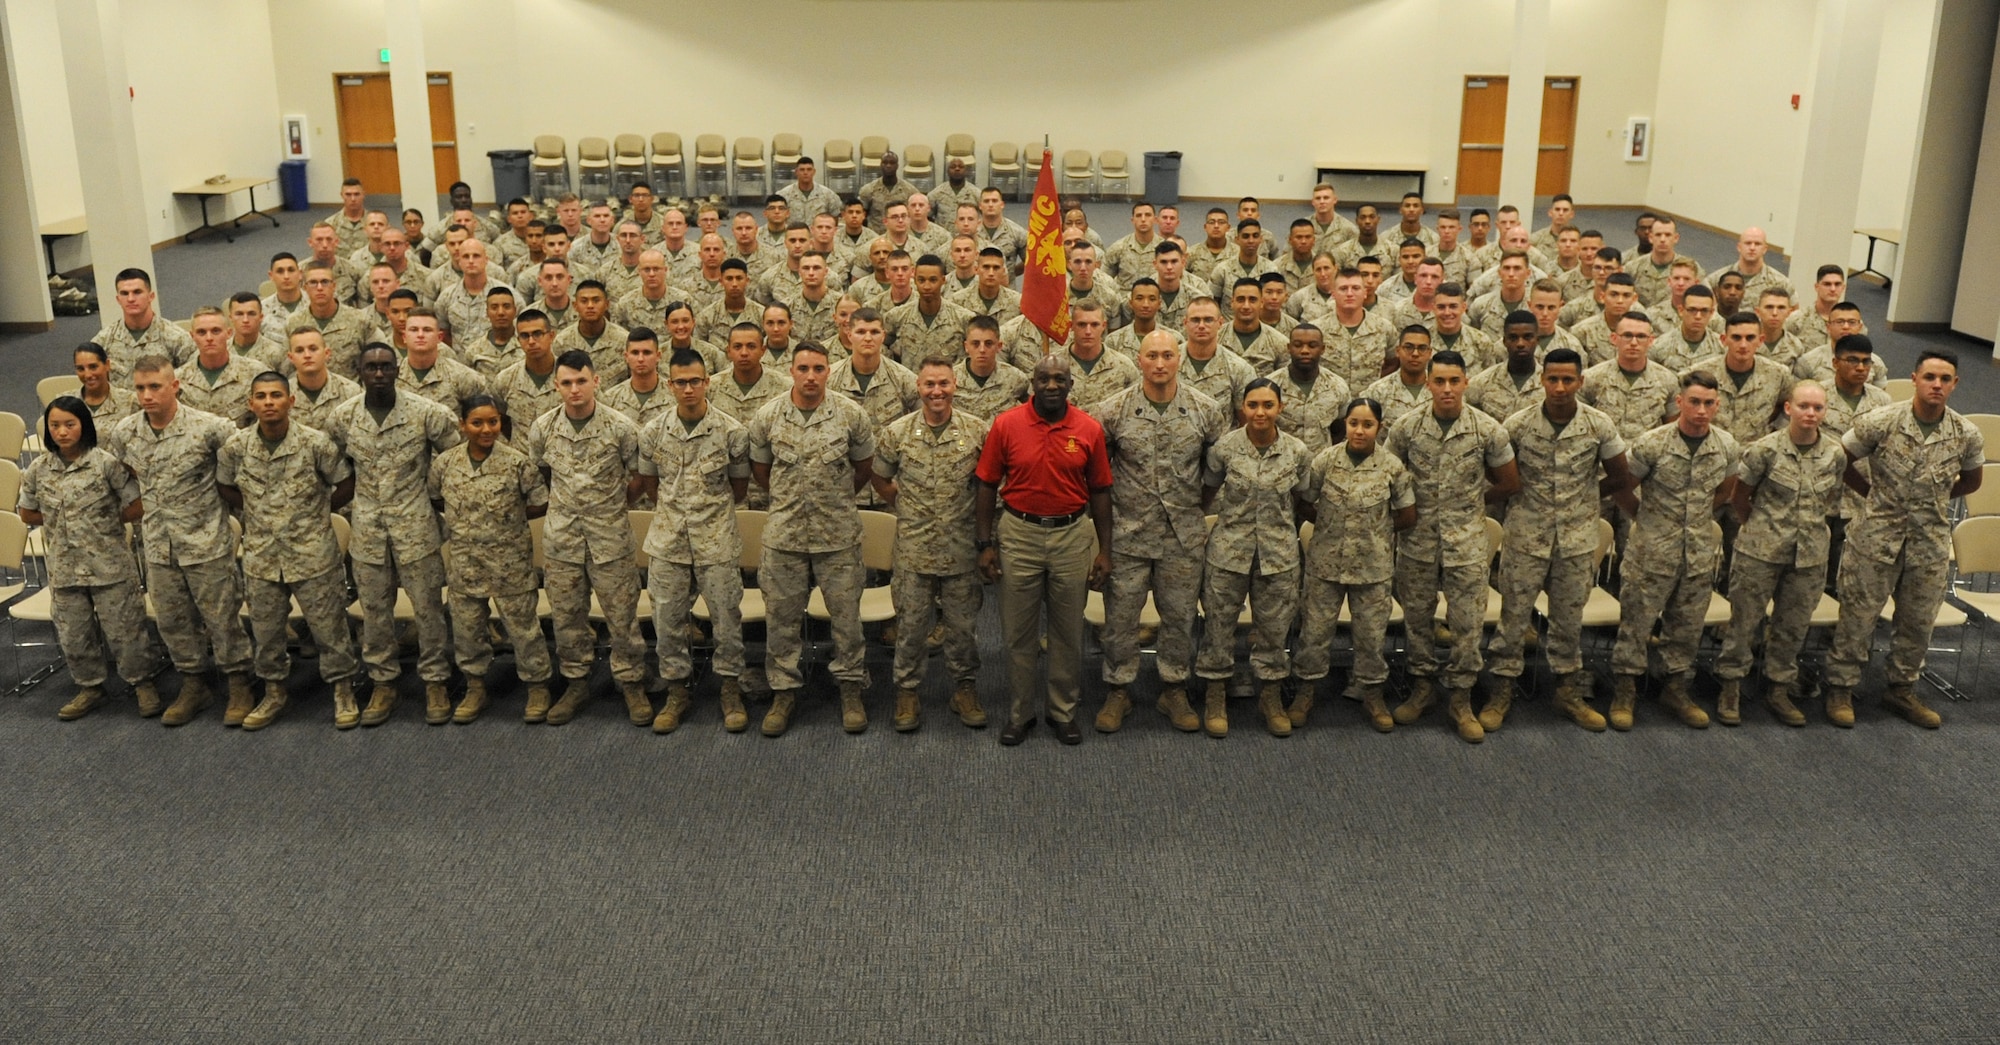 Sergeant Major of the Marine Corps Ronald Green poses for a group photo with members of the Keesler Marine Detachment at the Roberts Consolidated Aircraft Maintenance Facility Oct. 26, 2016, on Keesler Air Force Base, Miss. Green spoke on the current and future stance of the Marine Corps and the impact the young Marines have on its future. (U.S. Air Force photo by Kemberly Groue/Released)